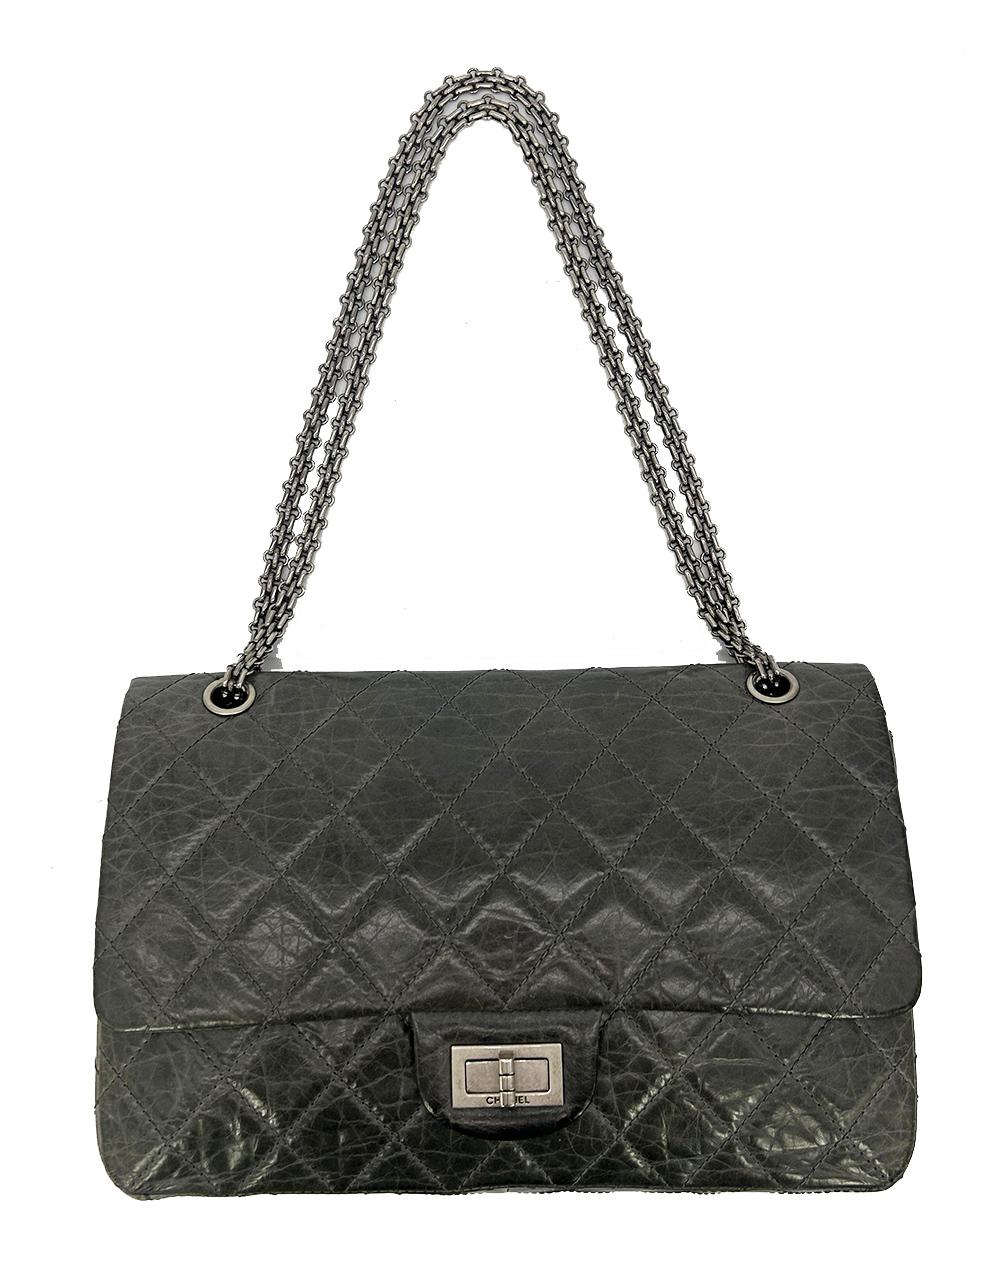 Chanel Grey Aged Calfskin Anniversary 2.55 Reissue 227 Double Flap Bag 12